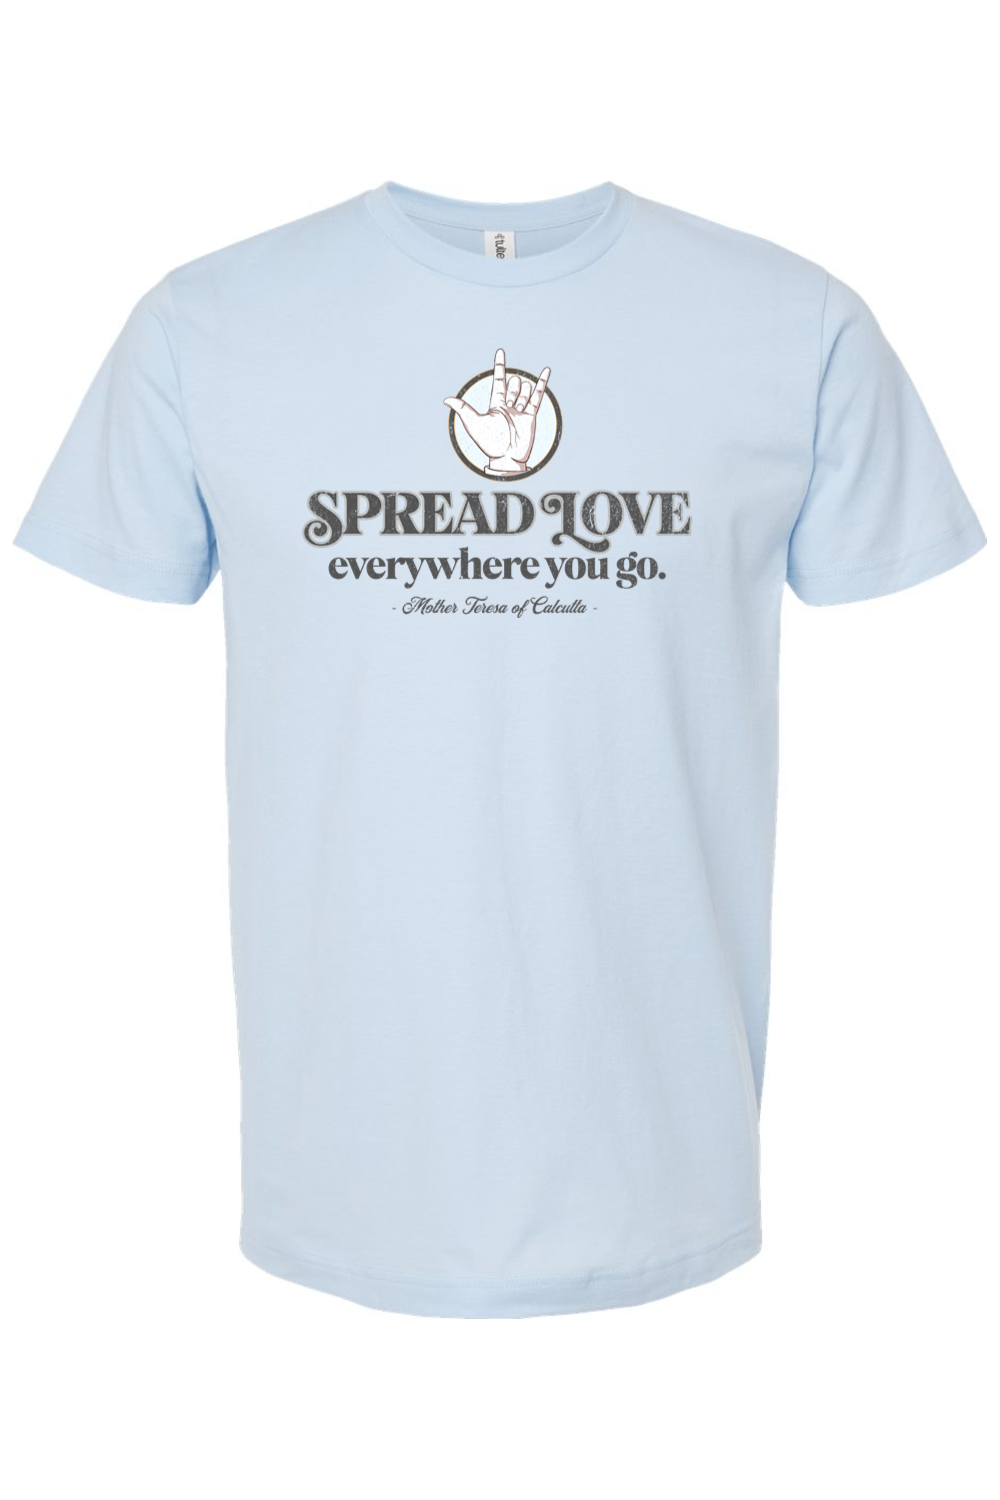 Spread Love (Mother Theresa)